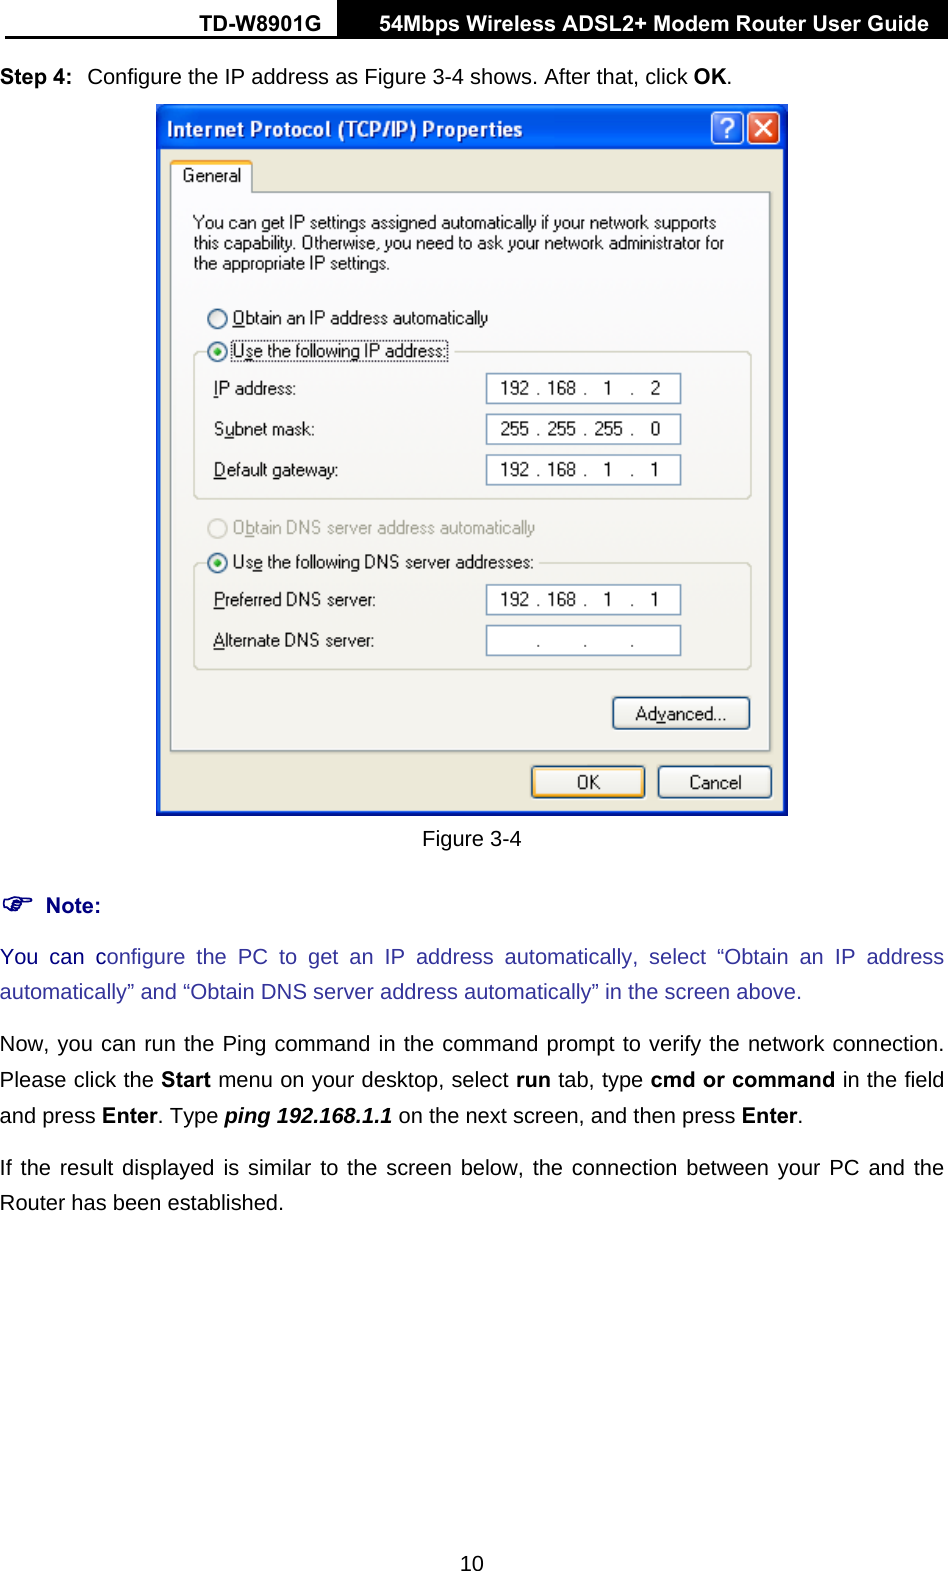 TD-W8901G   54Mbps Wireless ADSL2+ Modem Router User Guide 10 Step 4:  Configure the IP address as Figure 3-4 shows. After that, click OK.  Figure 3-4 ) Note: You can configure the PC to get an IP address automatically, select “Obtain an IP address automatically” and “Obtain DNS server address automatically” in the screen above.   Now, you can run the Ping command in the command prompt to verify the network connection. Please click the Start menu on your desktop, select run tab, type cmd or command in the field and press Enter. Type ping 192.168.1.1 on the next screen, and then press Enter. If the result displayed is similar to the screen below, the connection between your PC and the Router has been established. 